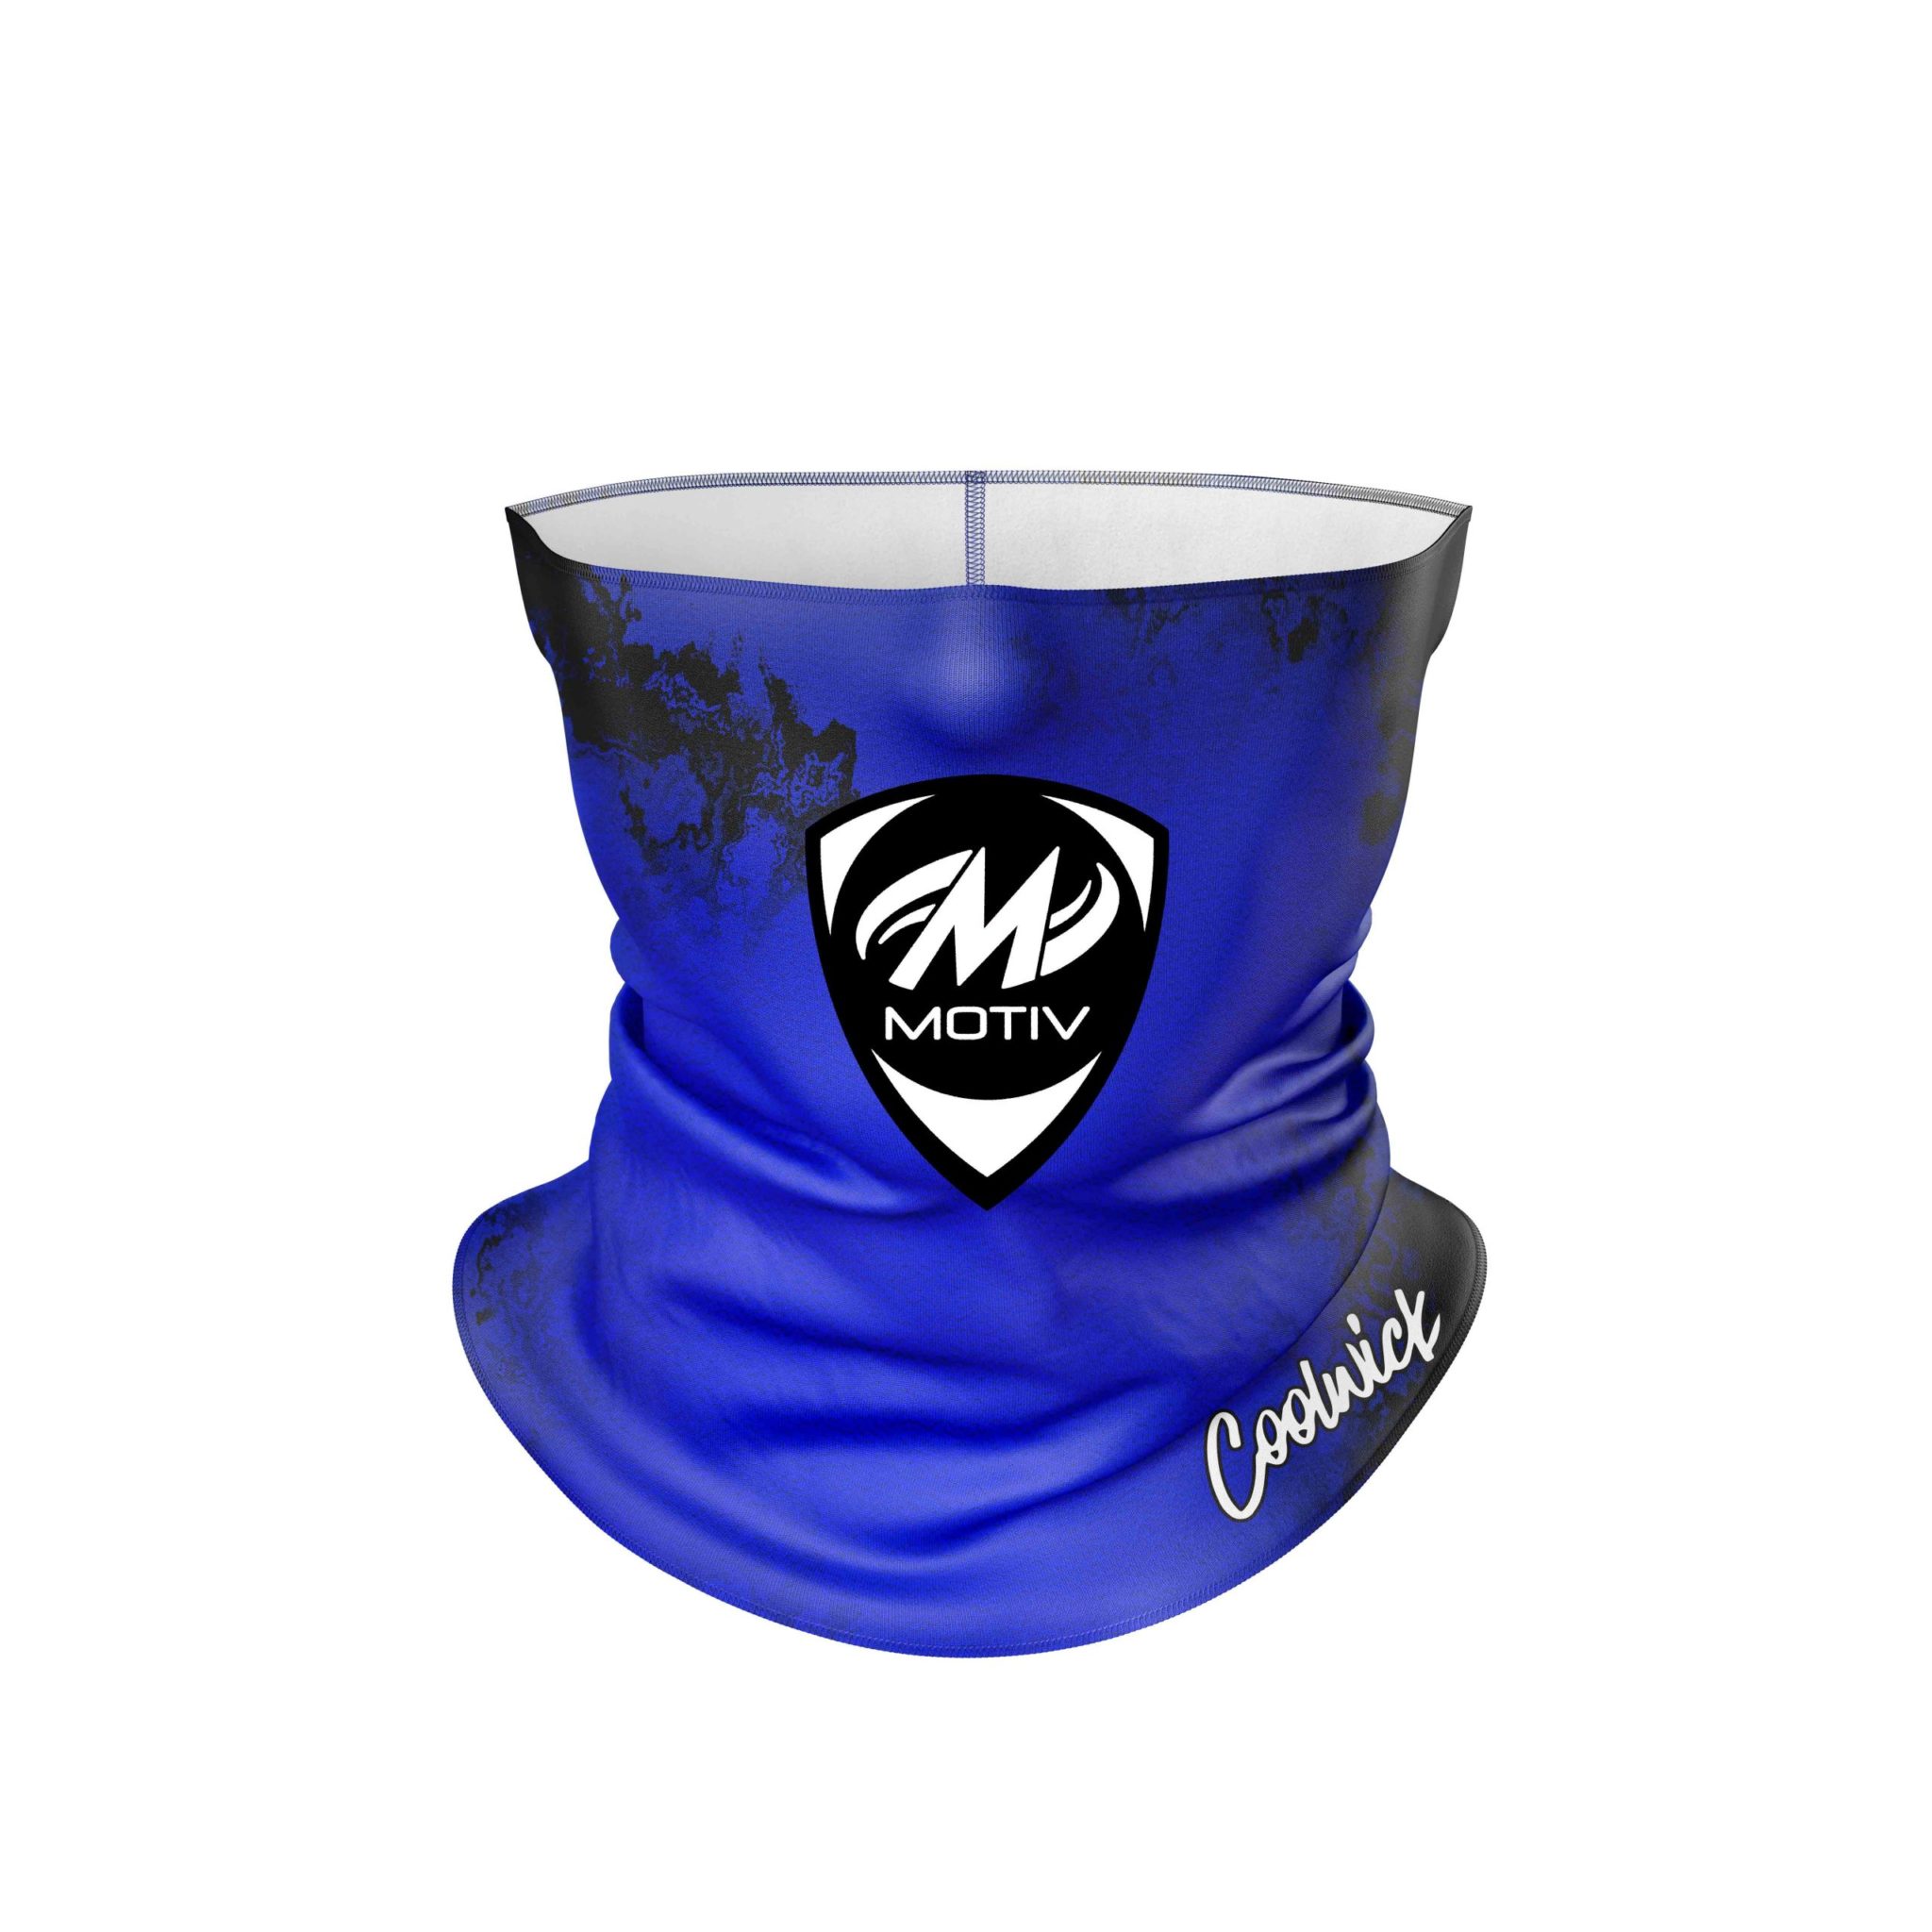 Motiv Crest Blue Toxic CoolWick Head Gear Mask All-In-1